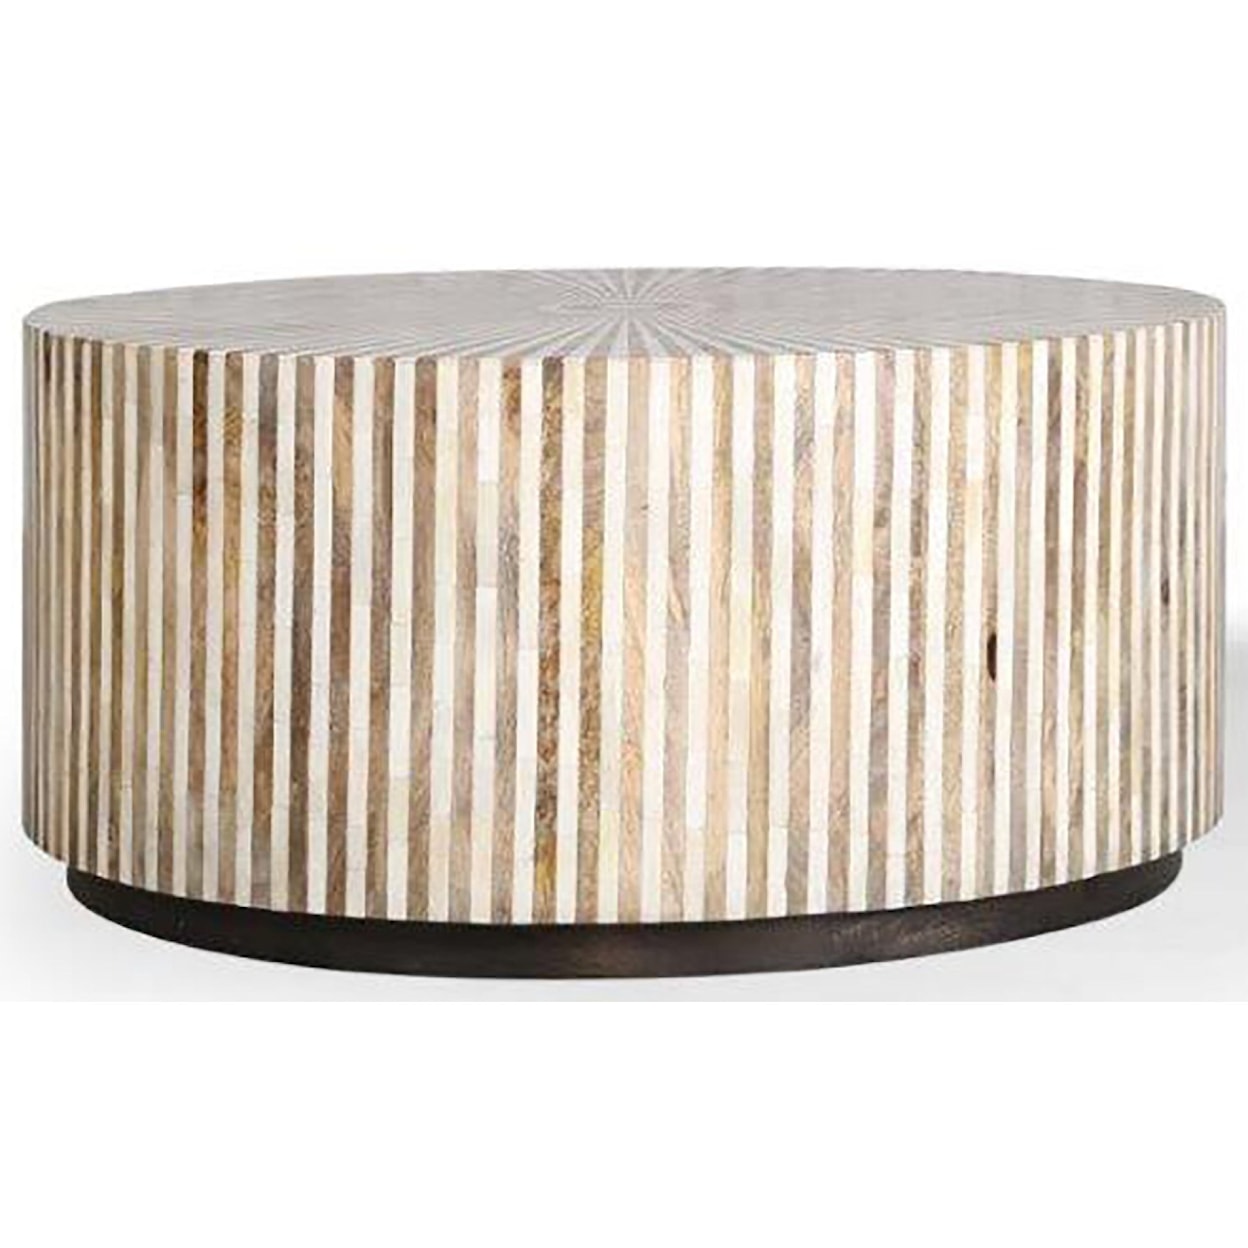 Paramount Furniture Crossings Downtown Round Cocktail Table